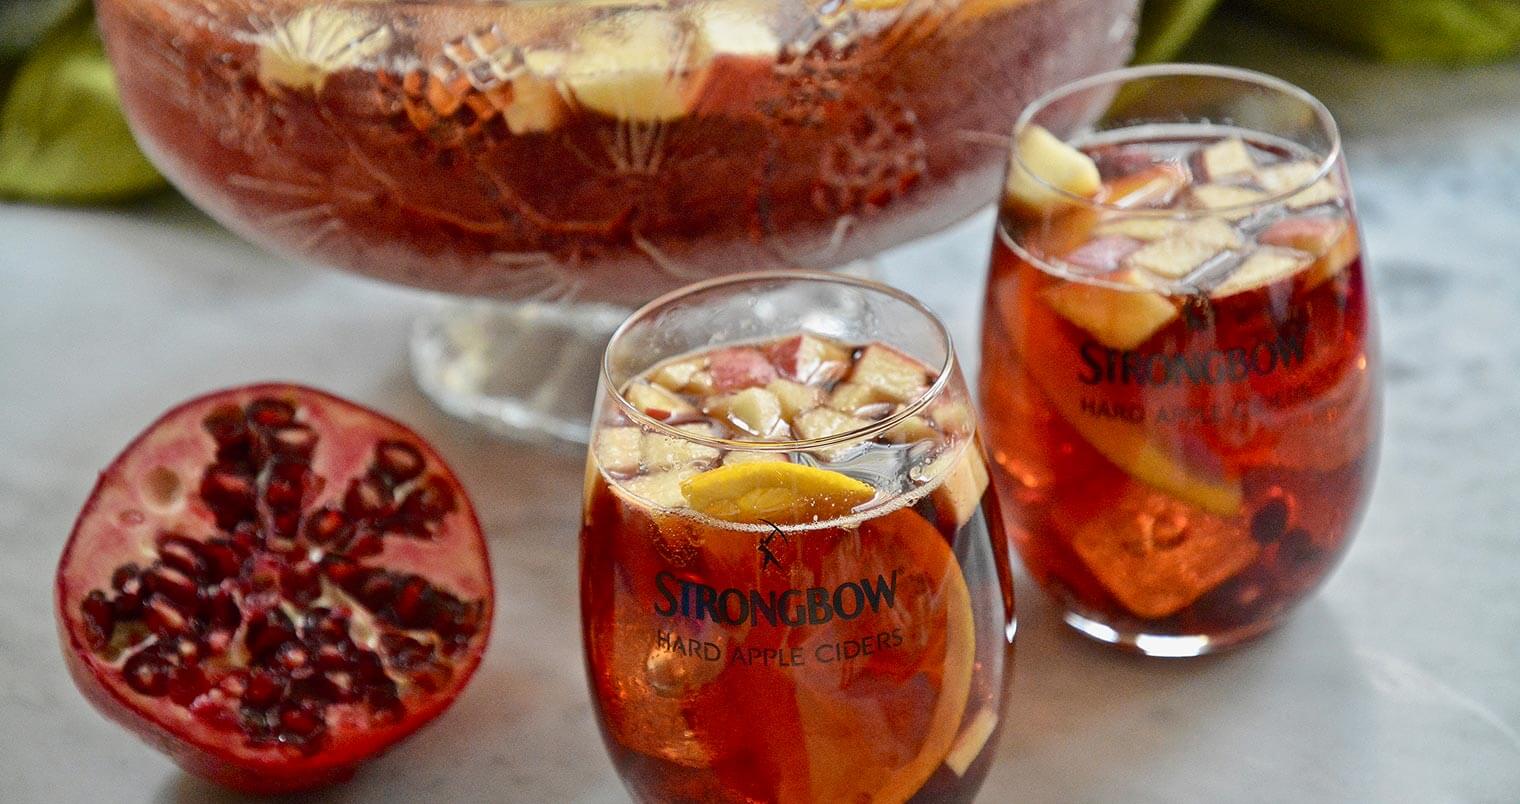 Strongbow Cider Pomegranate Punch, featured image